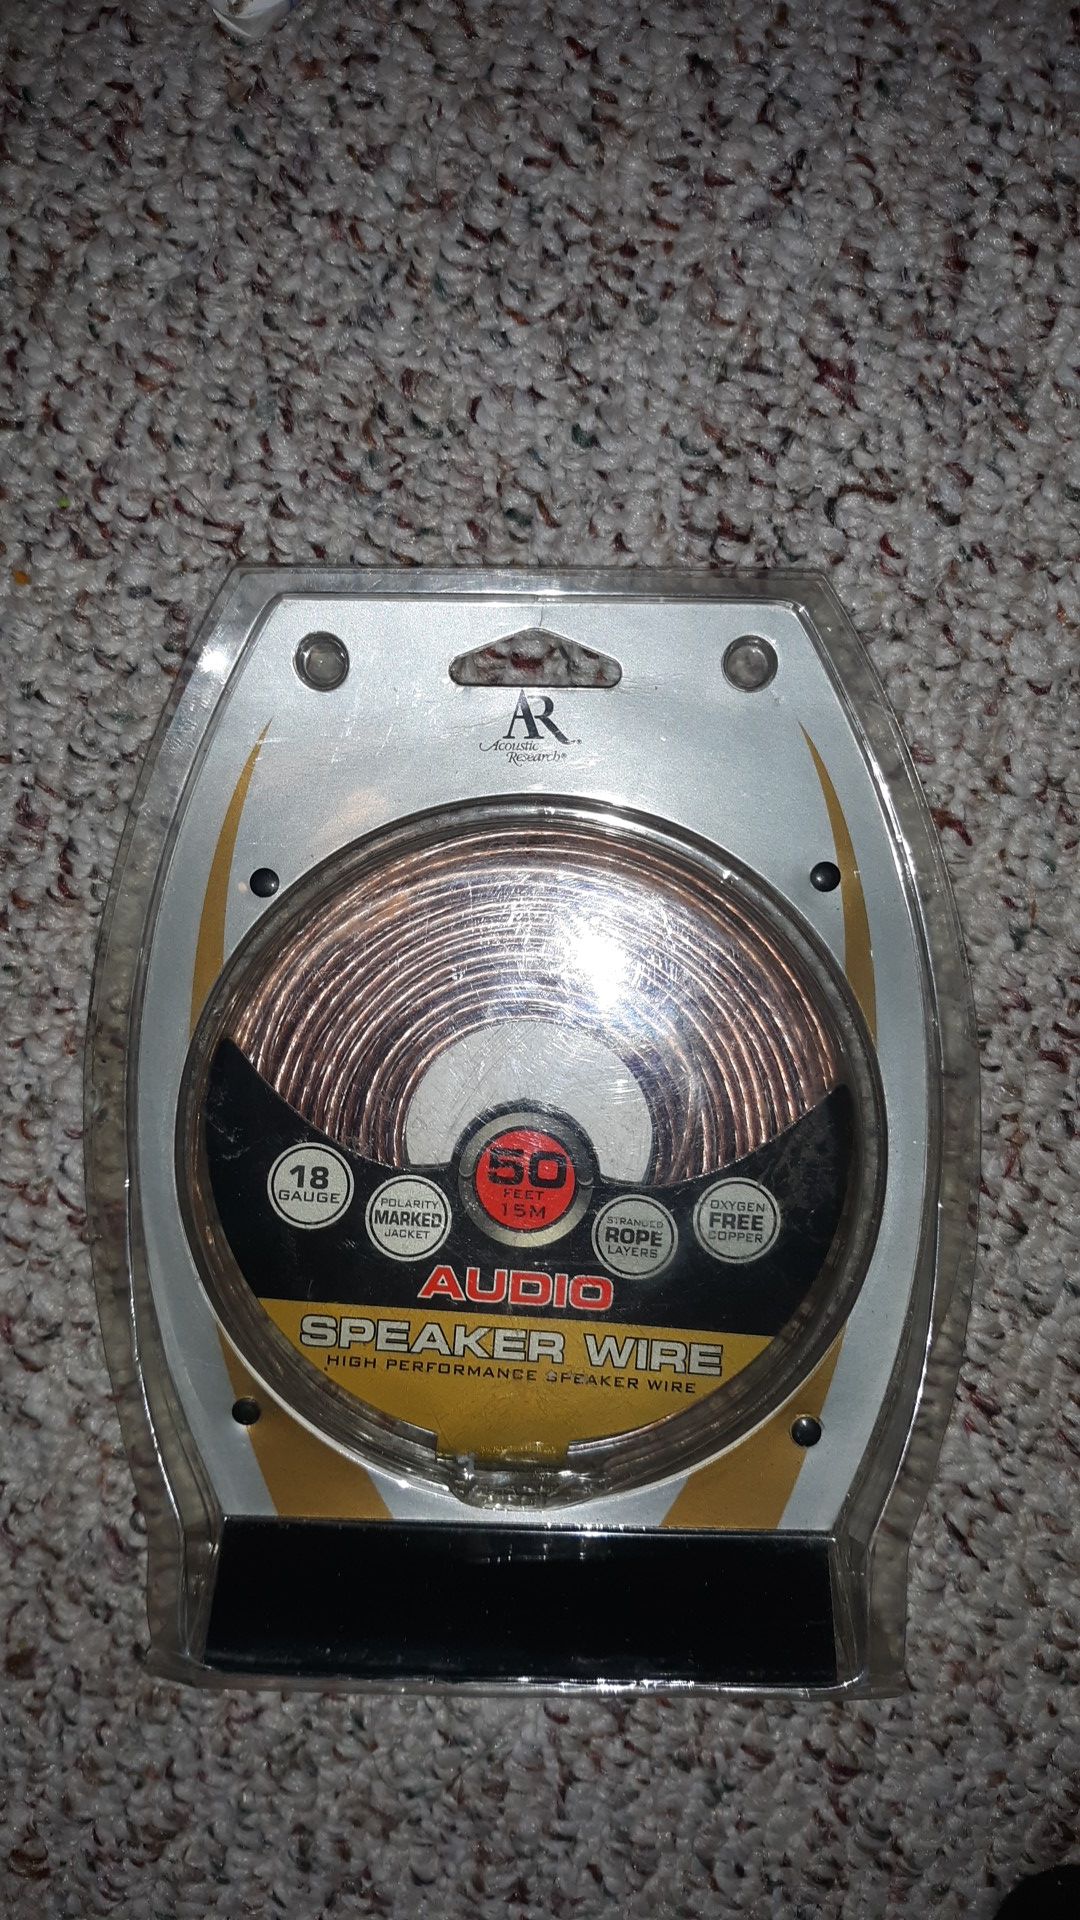 Audio Speaker Wire 50 ft. , PLEASE check my other listing items, thanks!